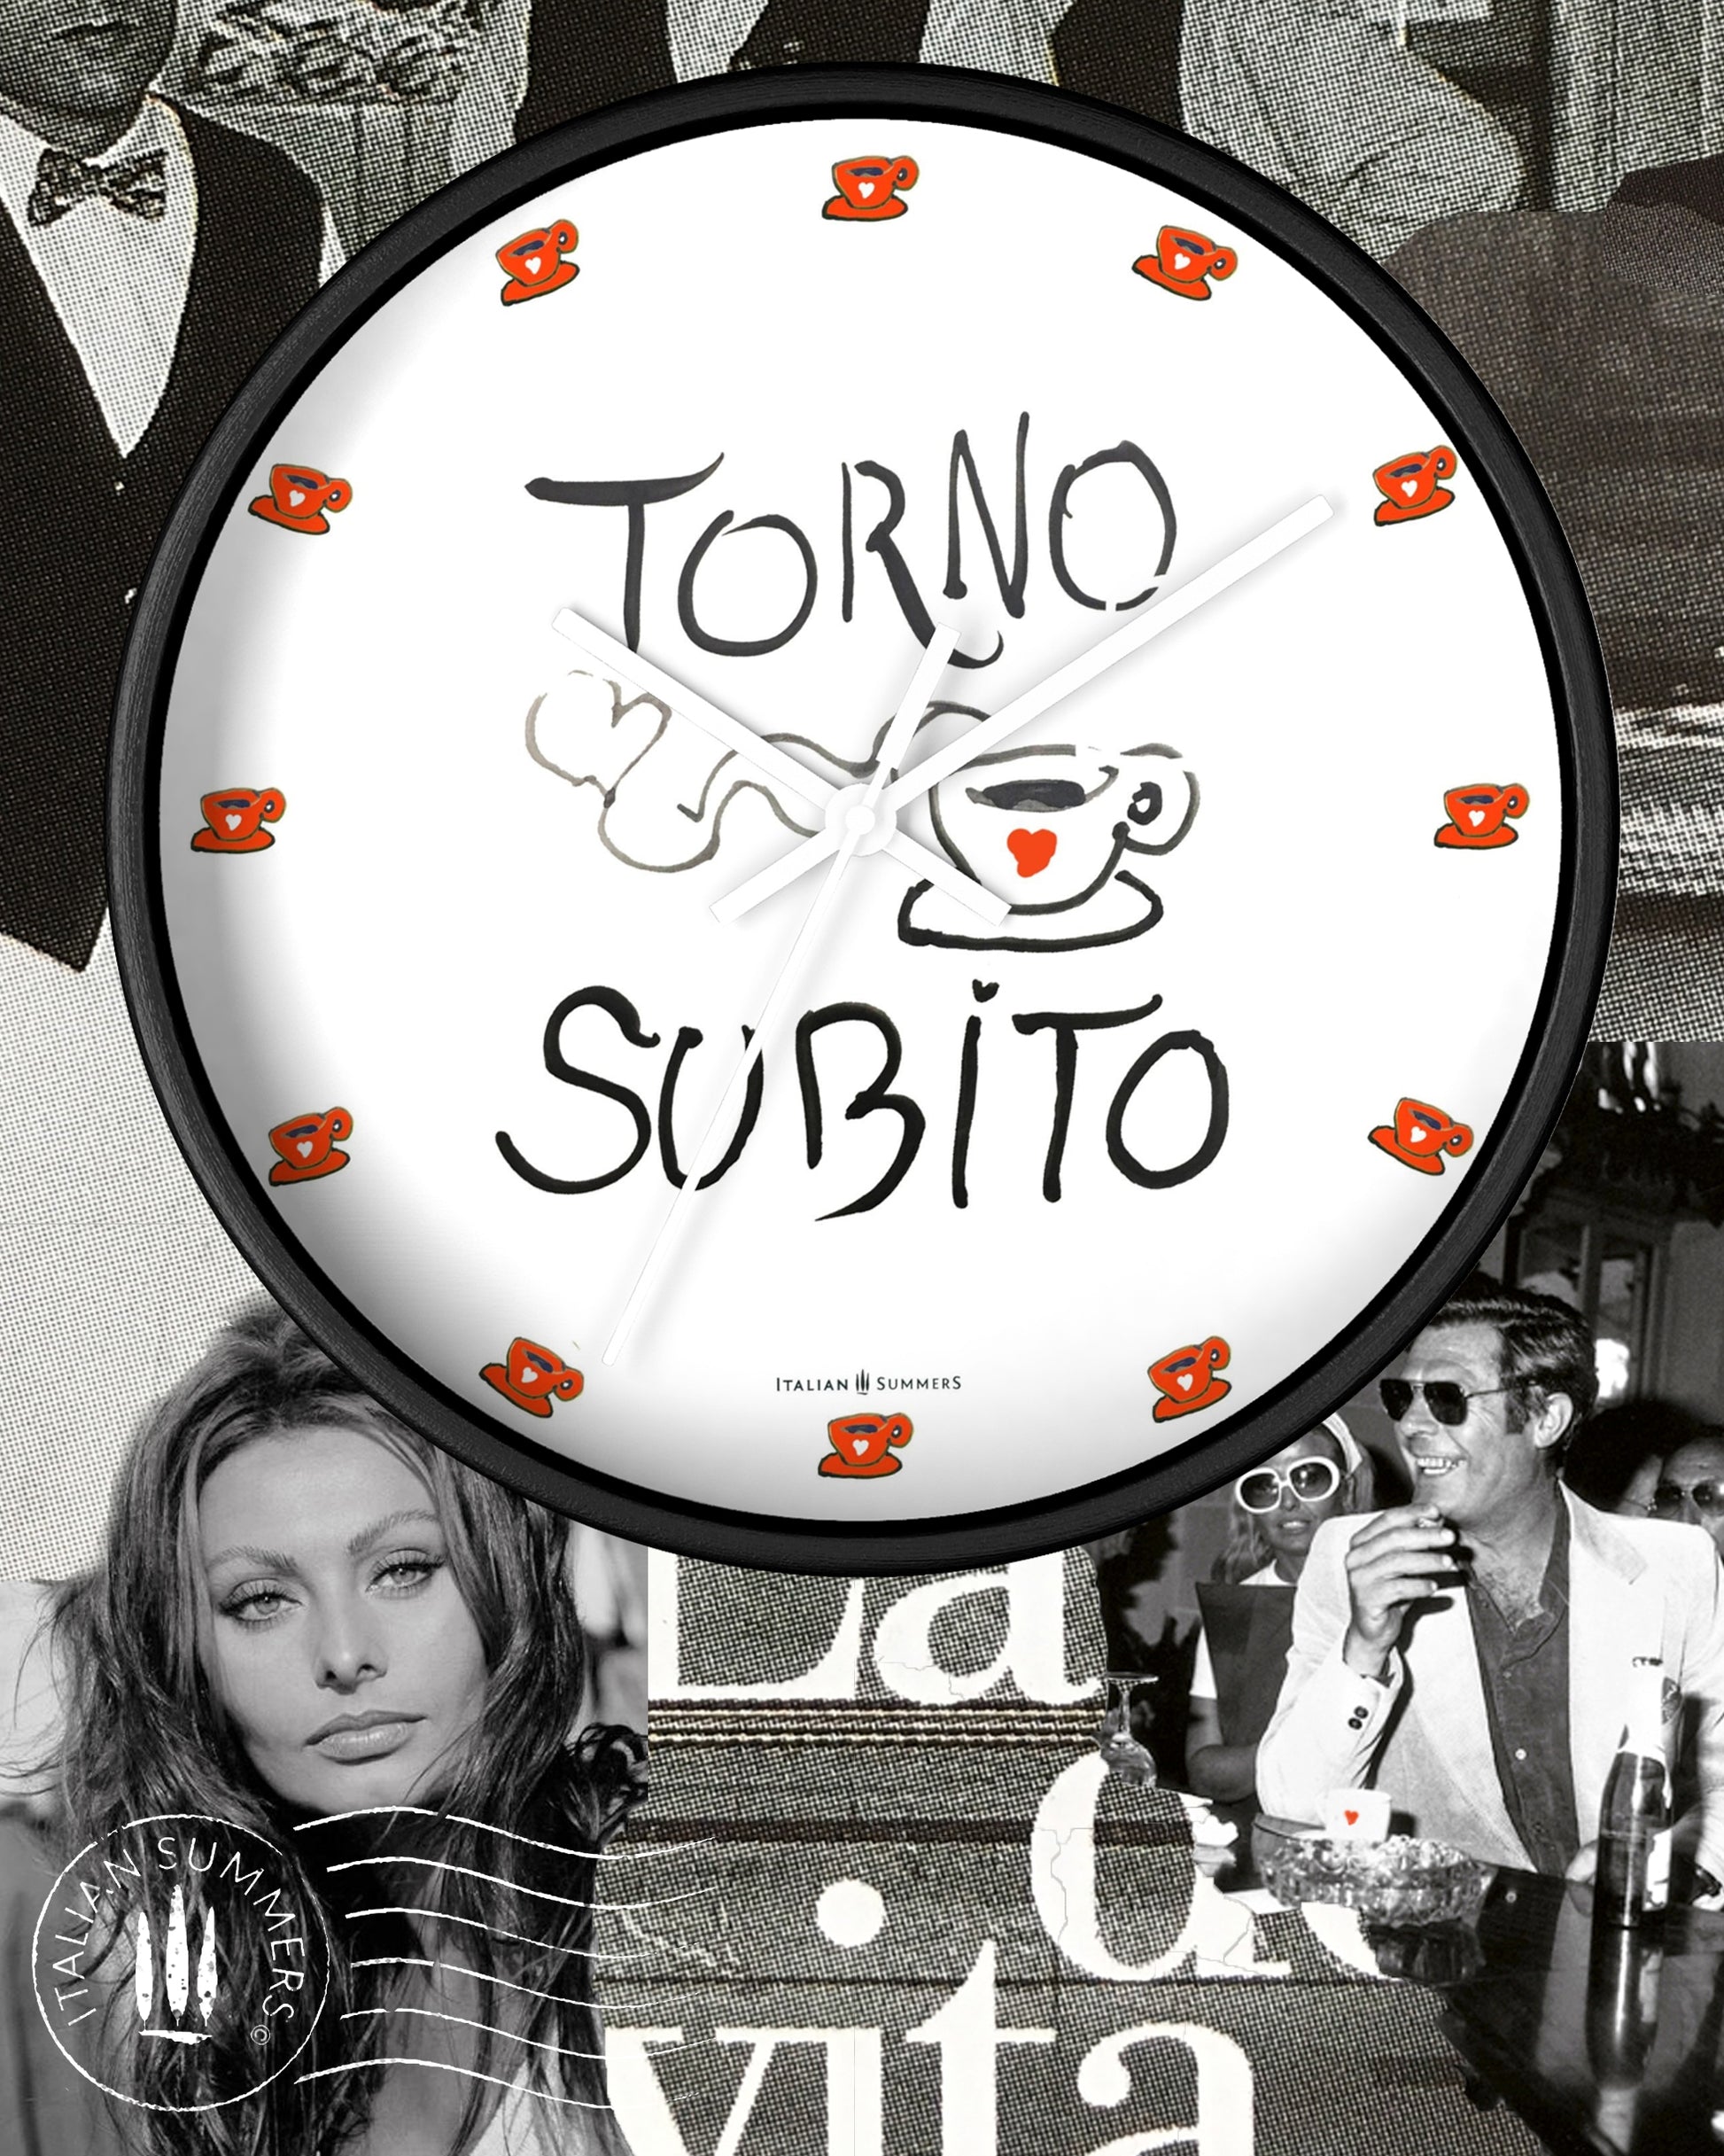  Italy inspired Wall Clock Torno Subito Inspired by the Italian notes left behind by shops on their espresso breaks. Designed and sold by Italian  Summers